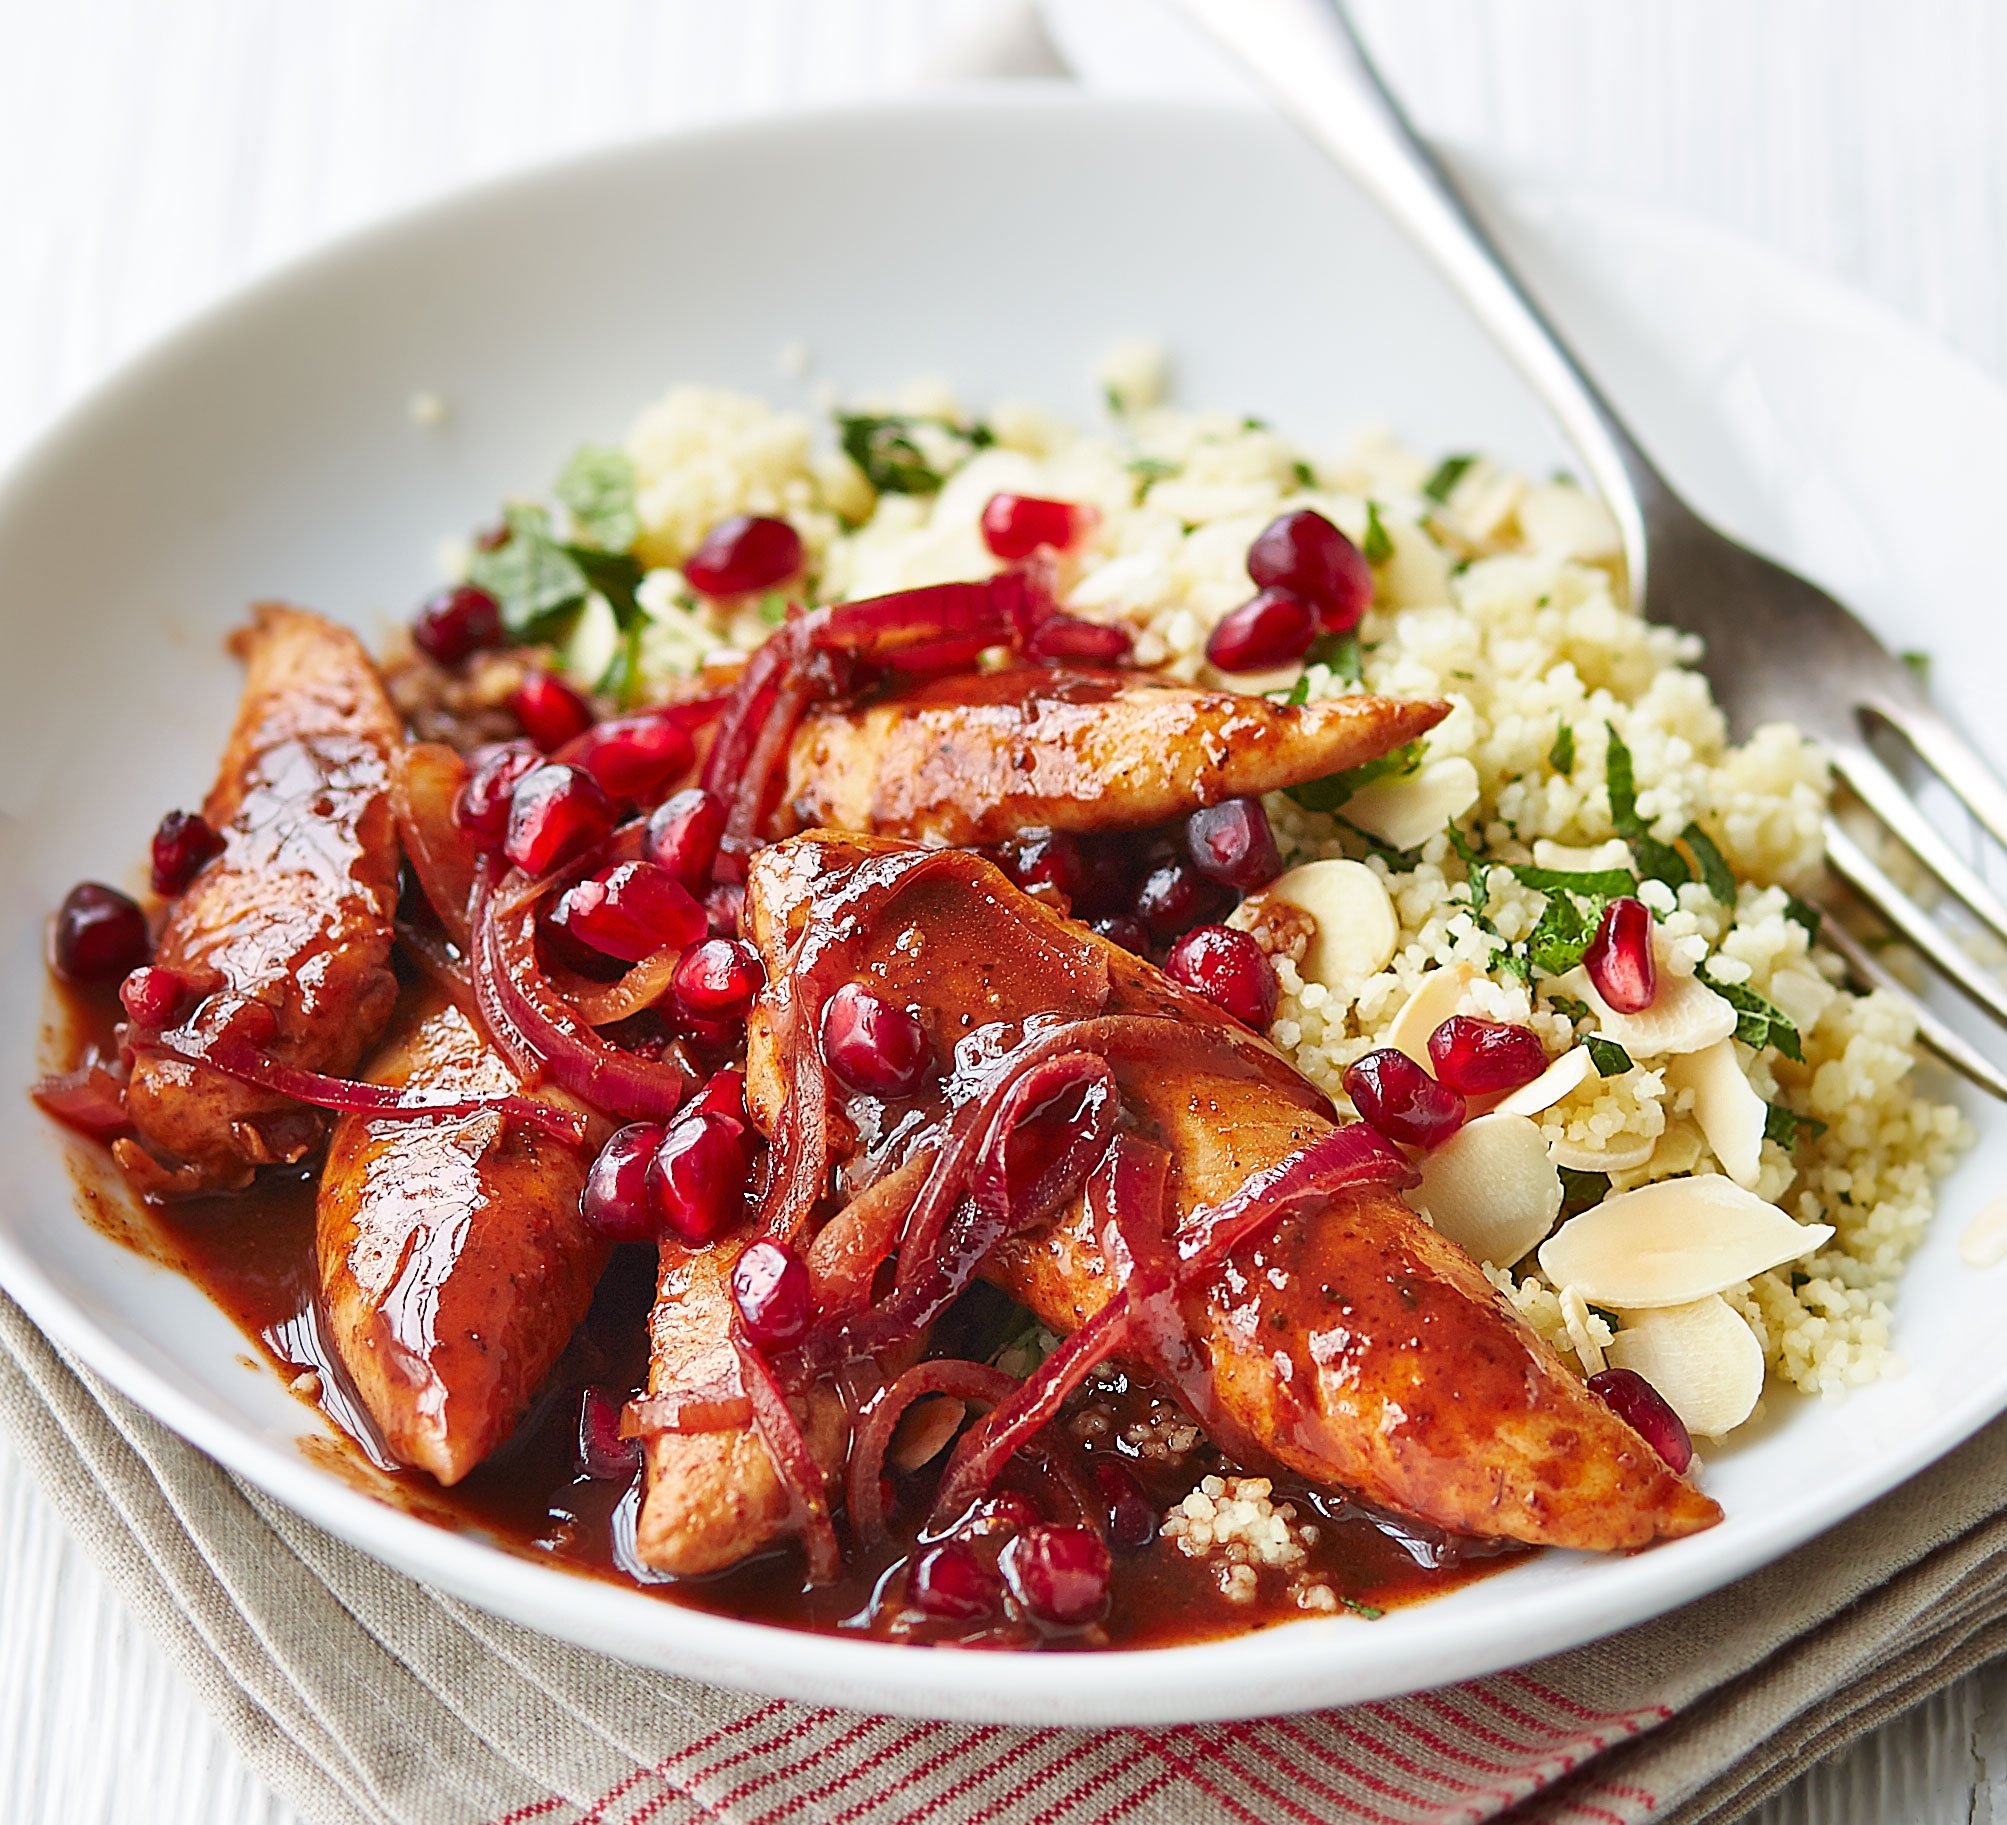 10 Fantastic Healthy Food Ideas For Dinner pomegranate chicken with almond couscous recipe bbc good food 3 2023